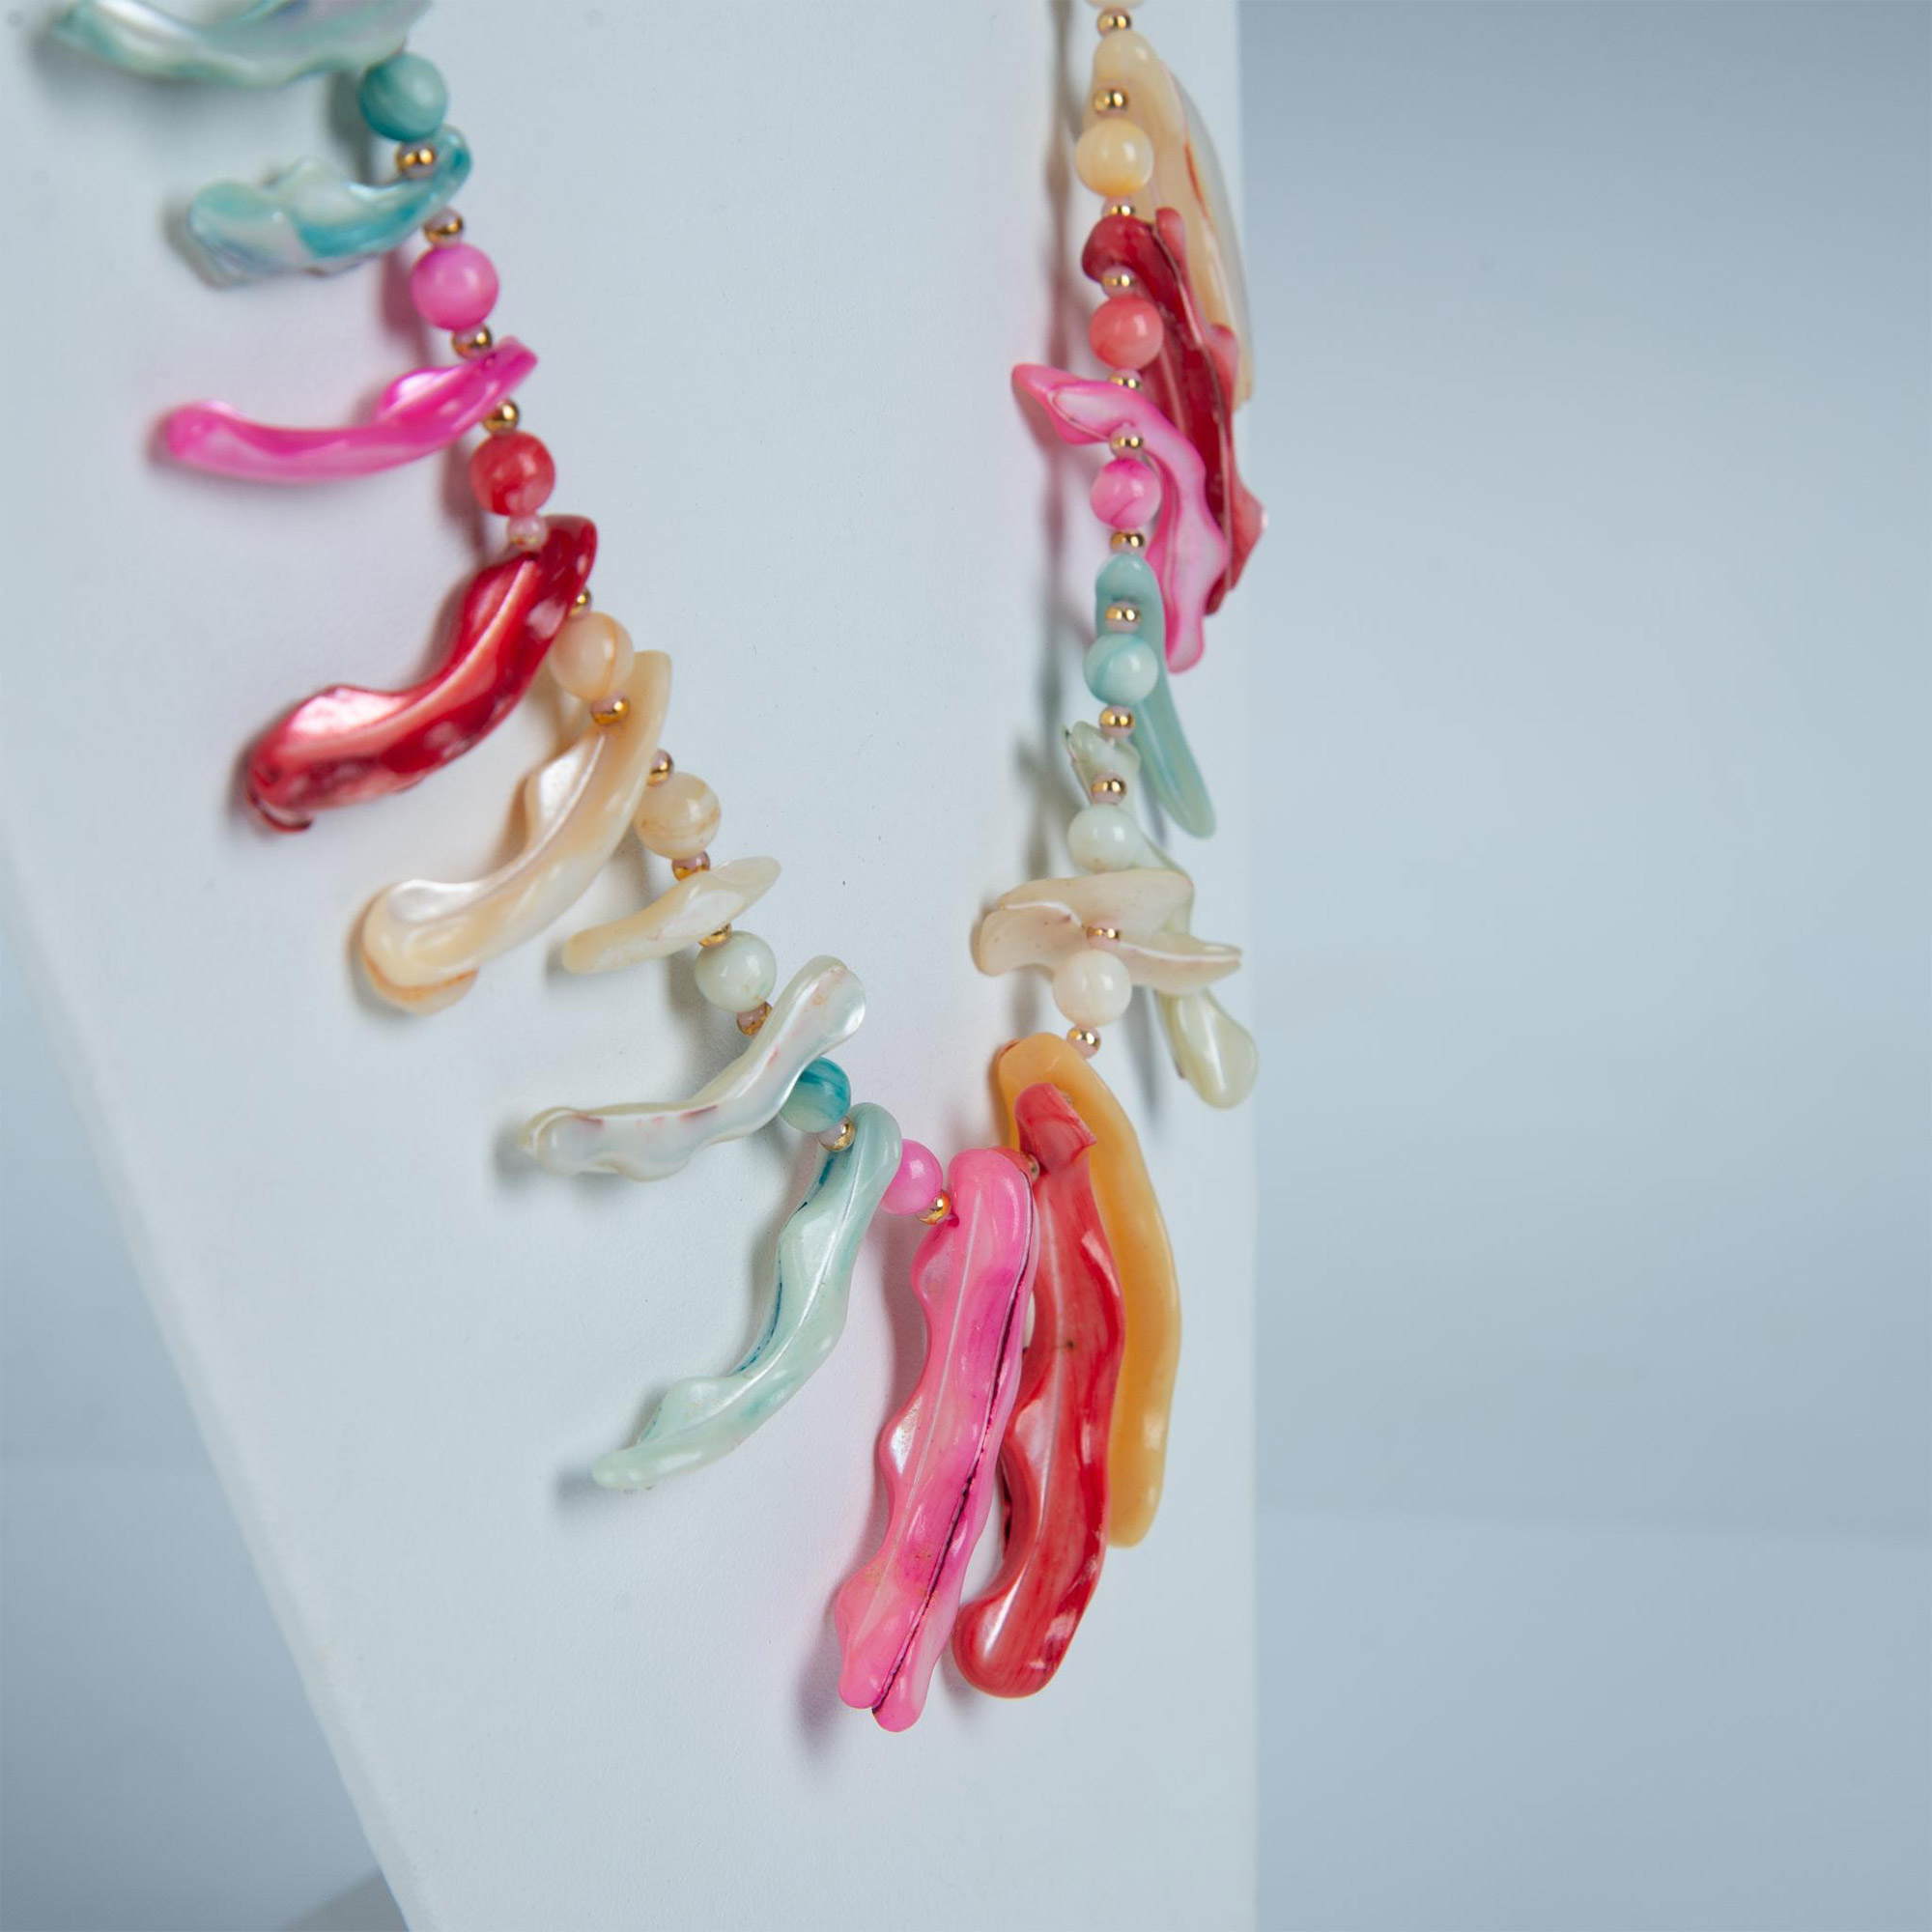 Pastel Beads and Shell Fragments Necklace - Image 2 of 3